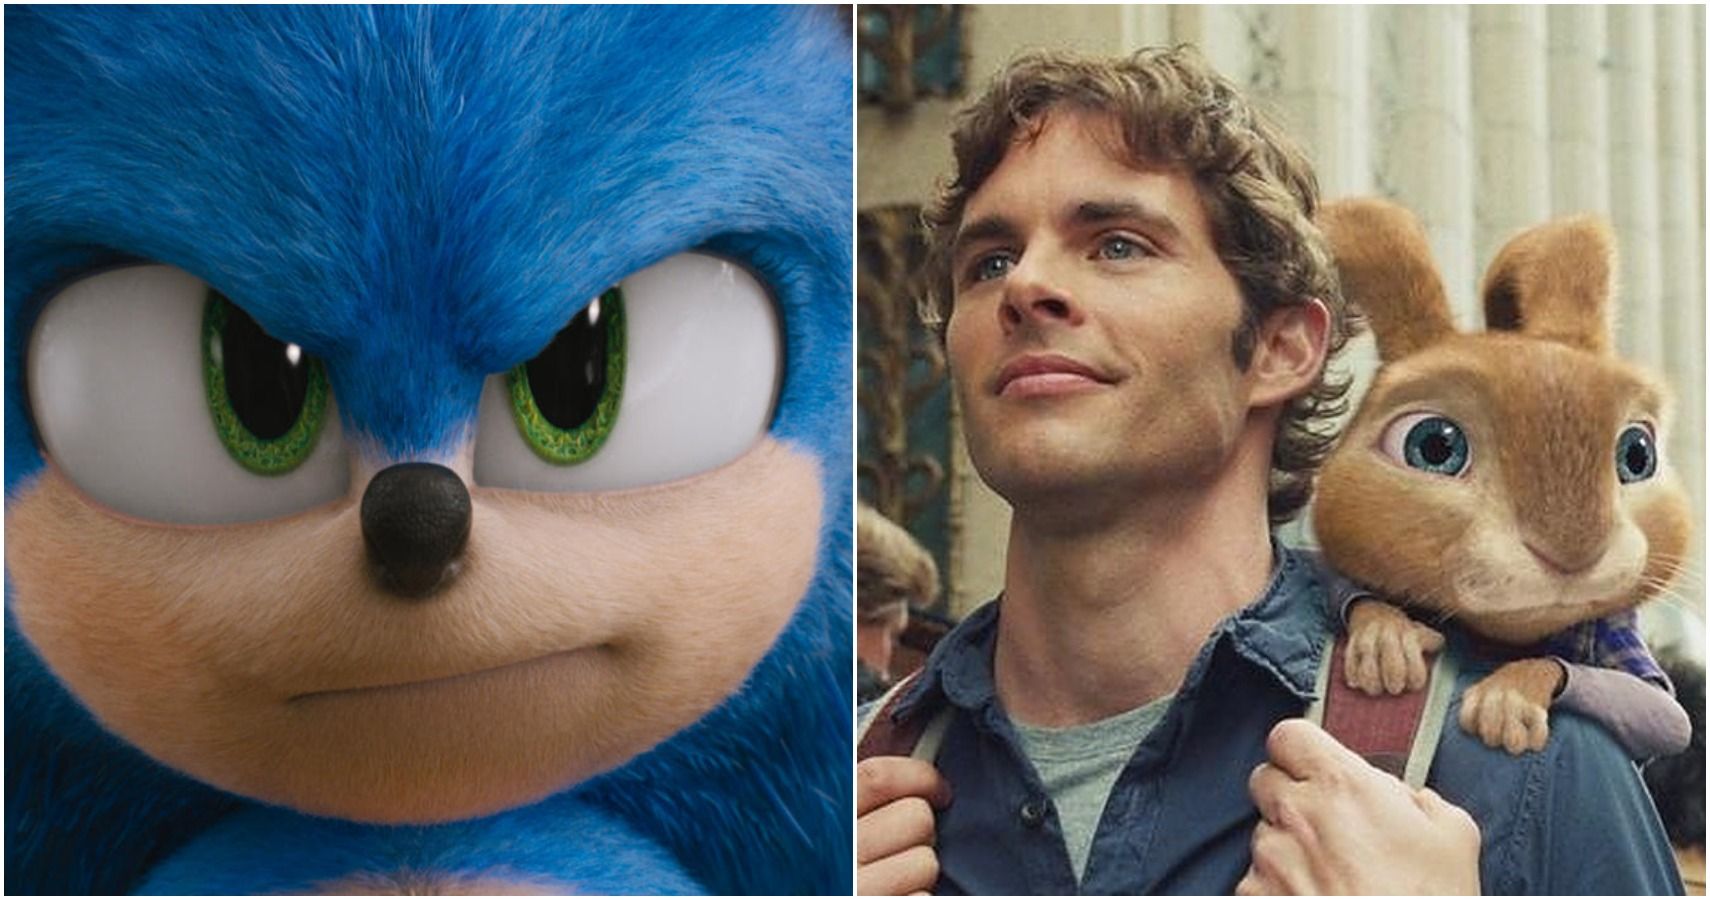 That 'Sonic The Hedgehog' Movie Casts James Marsden, Seemingly As